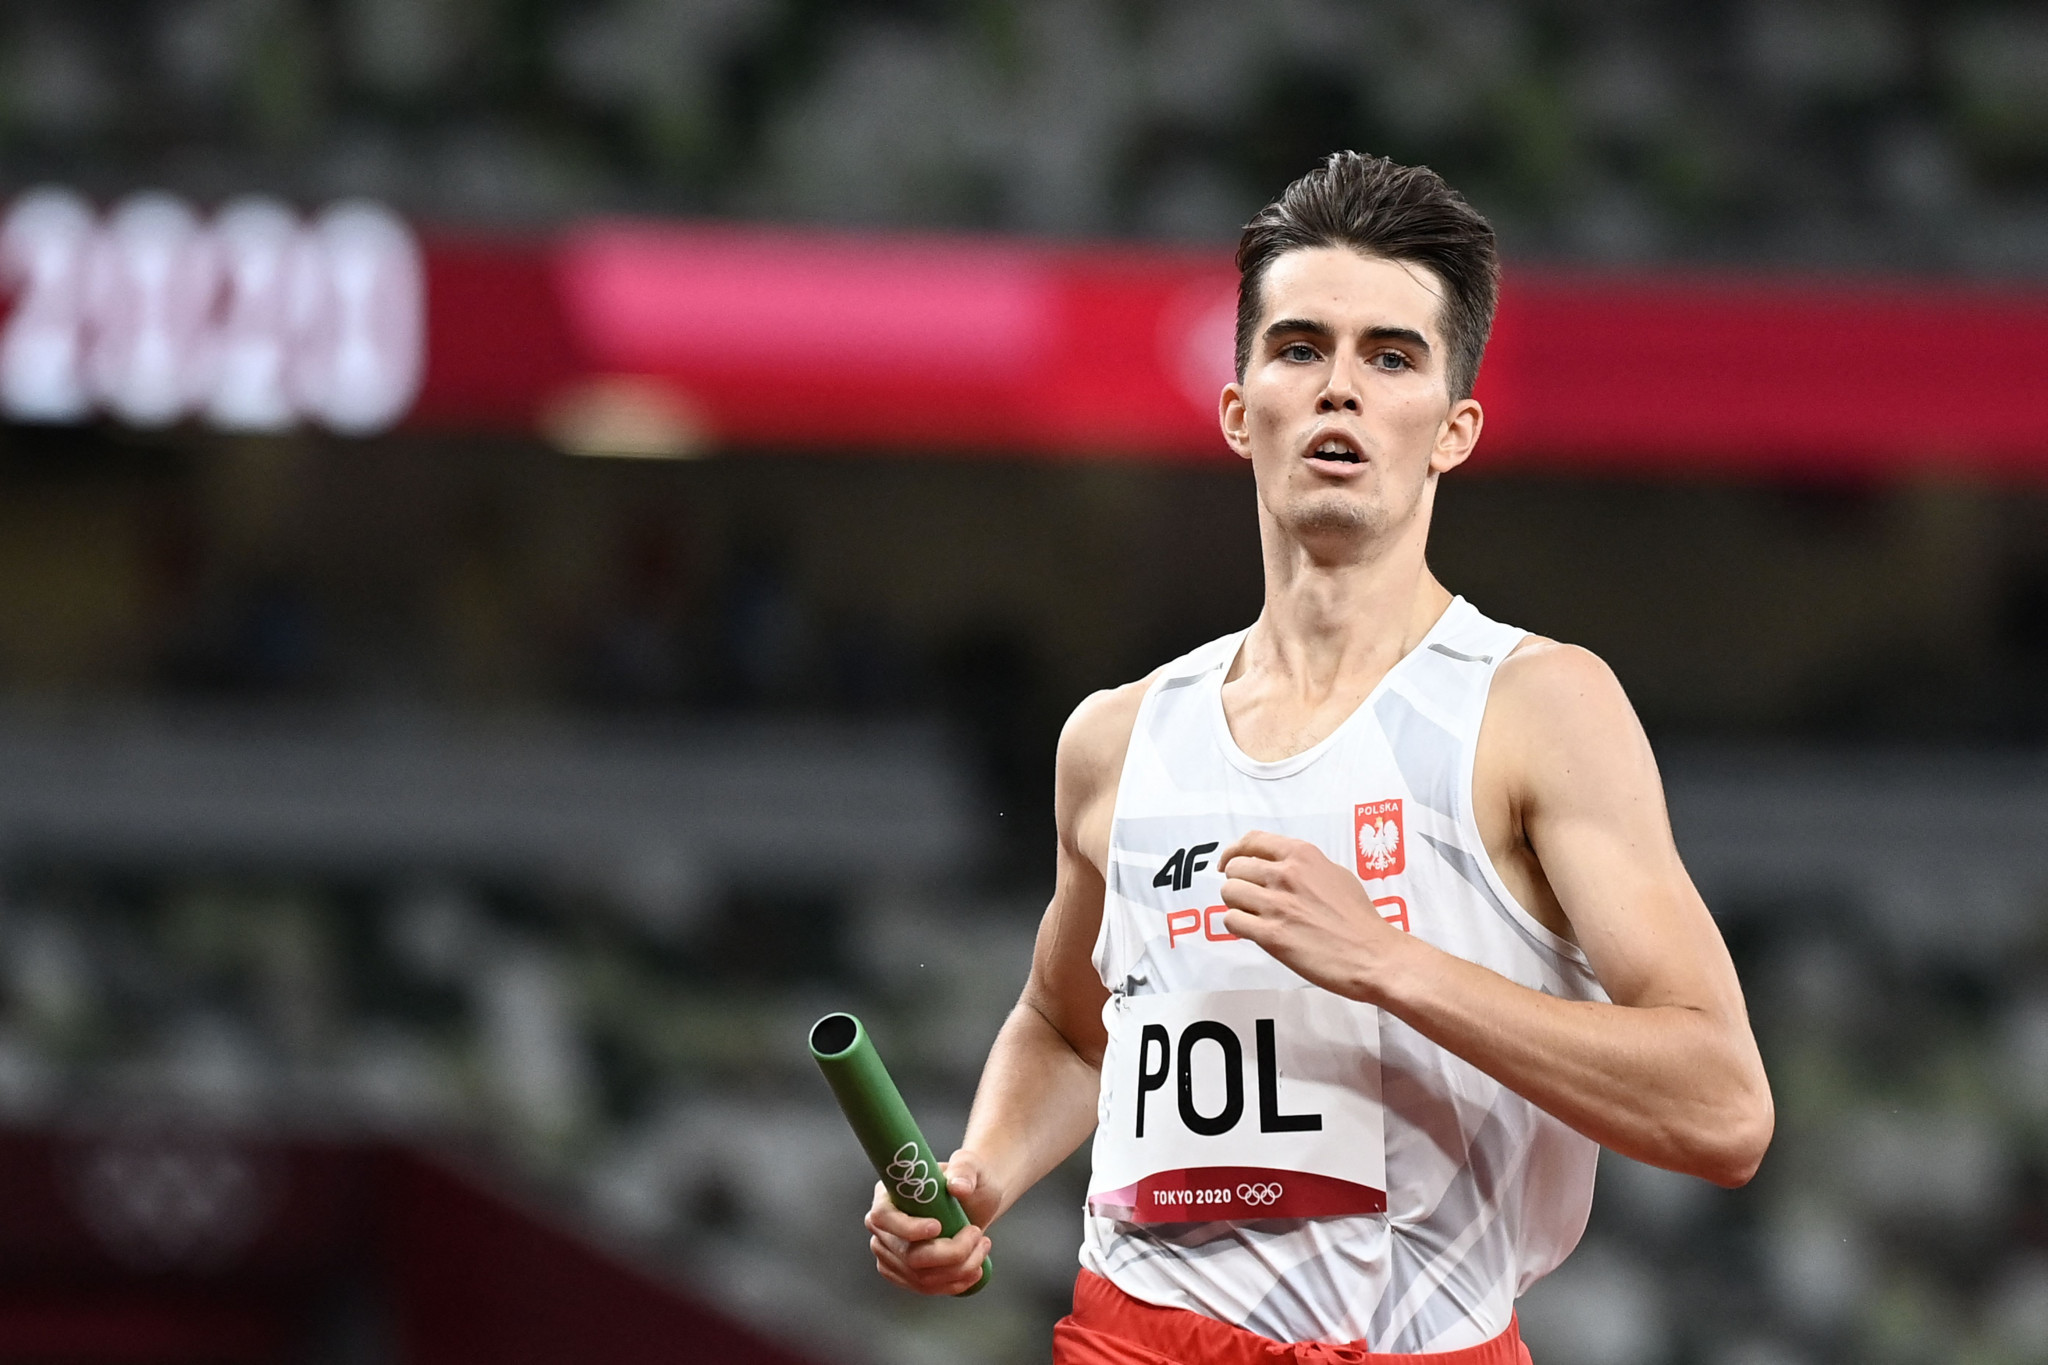 Kajetan Duszyński won a gold medal in the mixed 4x400m relay with Poland at Tokyo 2020  ©Getty Images